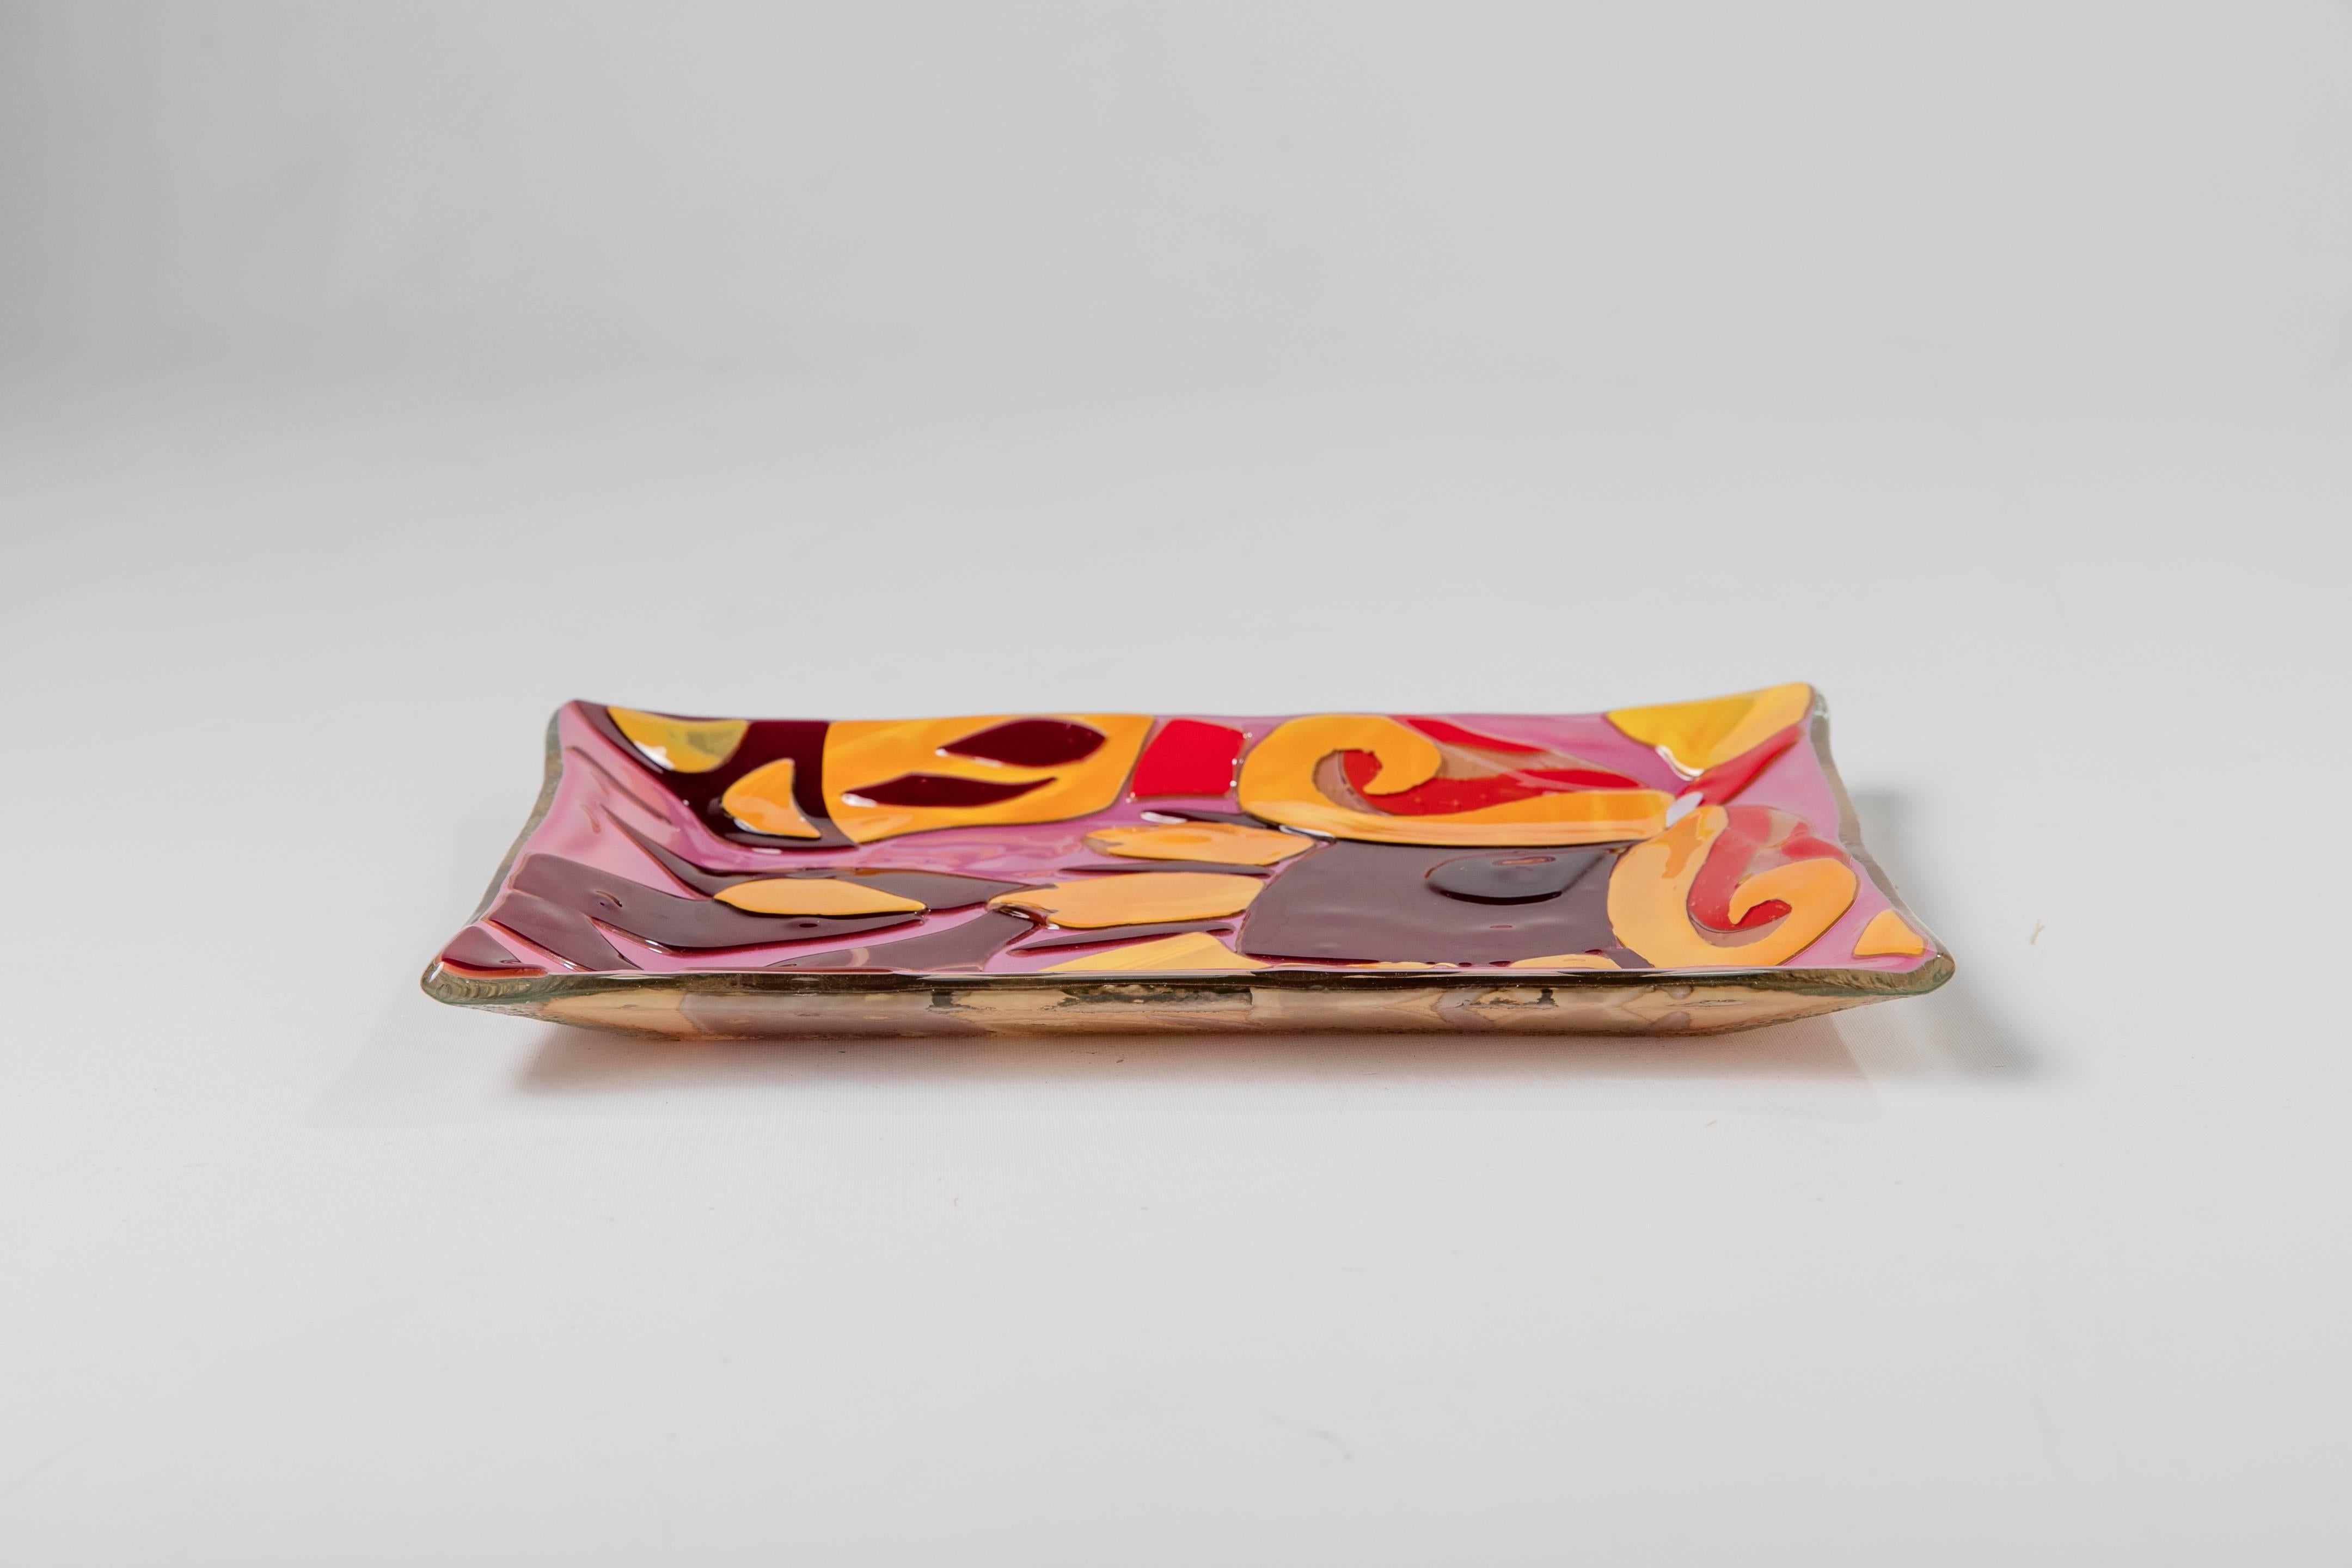 A colorful 1990s molded glass catchall from Italian luxury brand Etro with decorative pattern in yellow, red, burgundy, and mauve, perfect for holding keys and loose change.